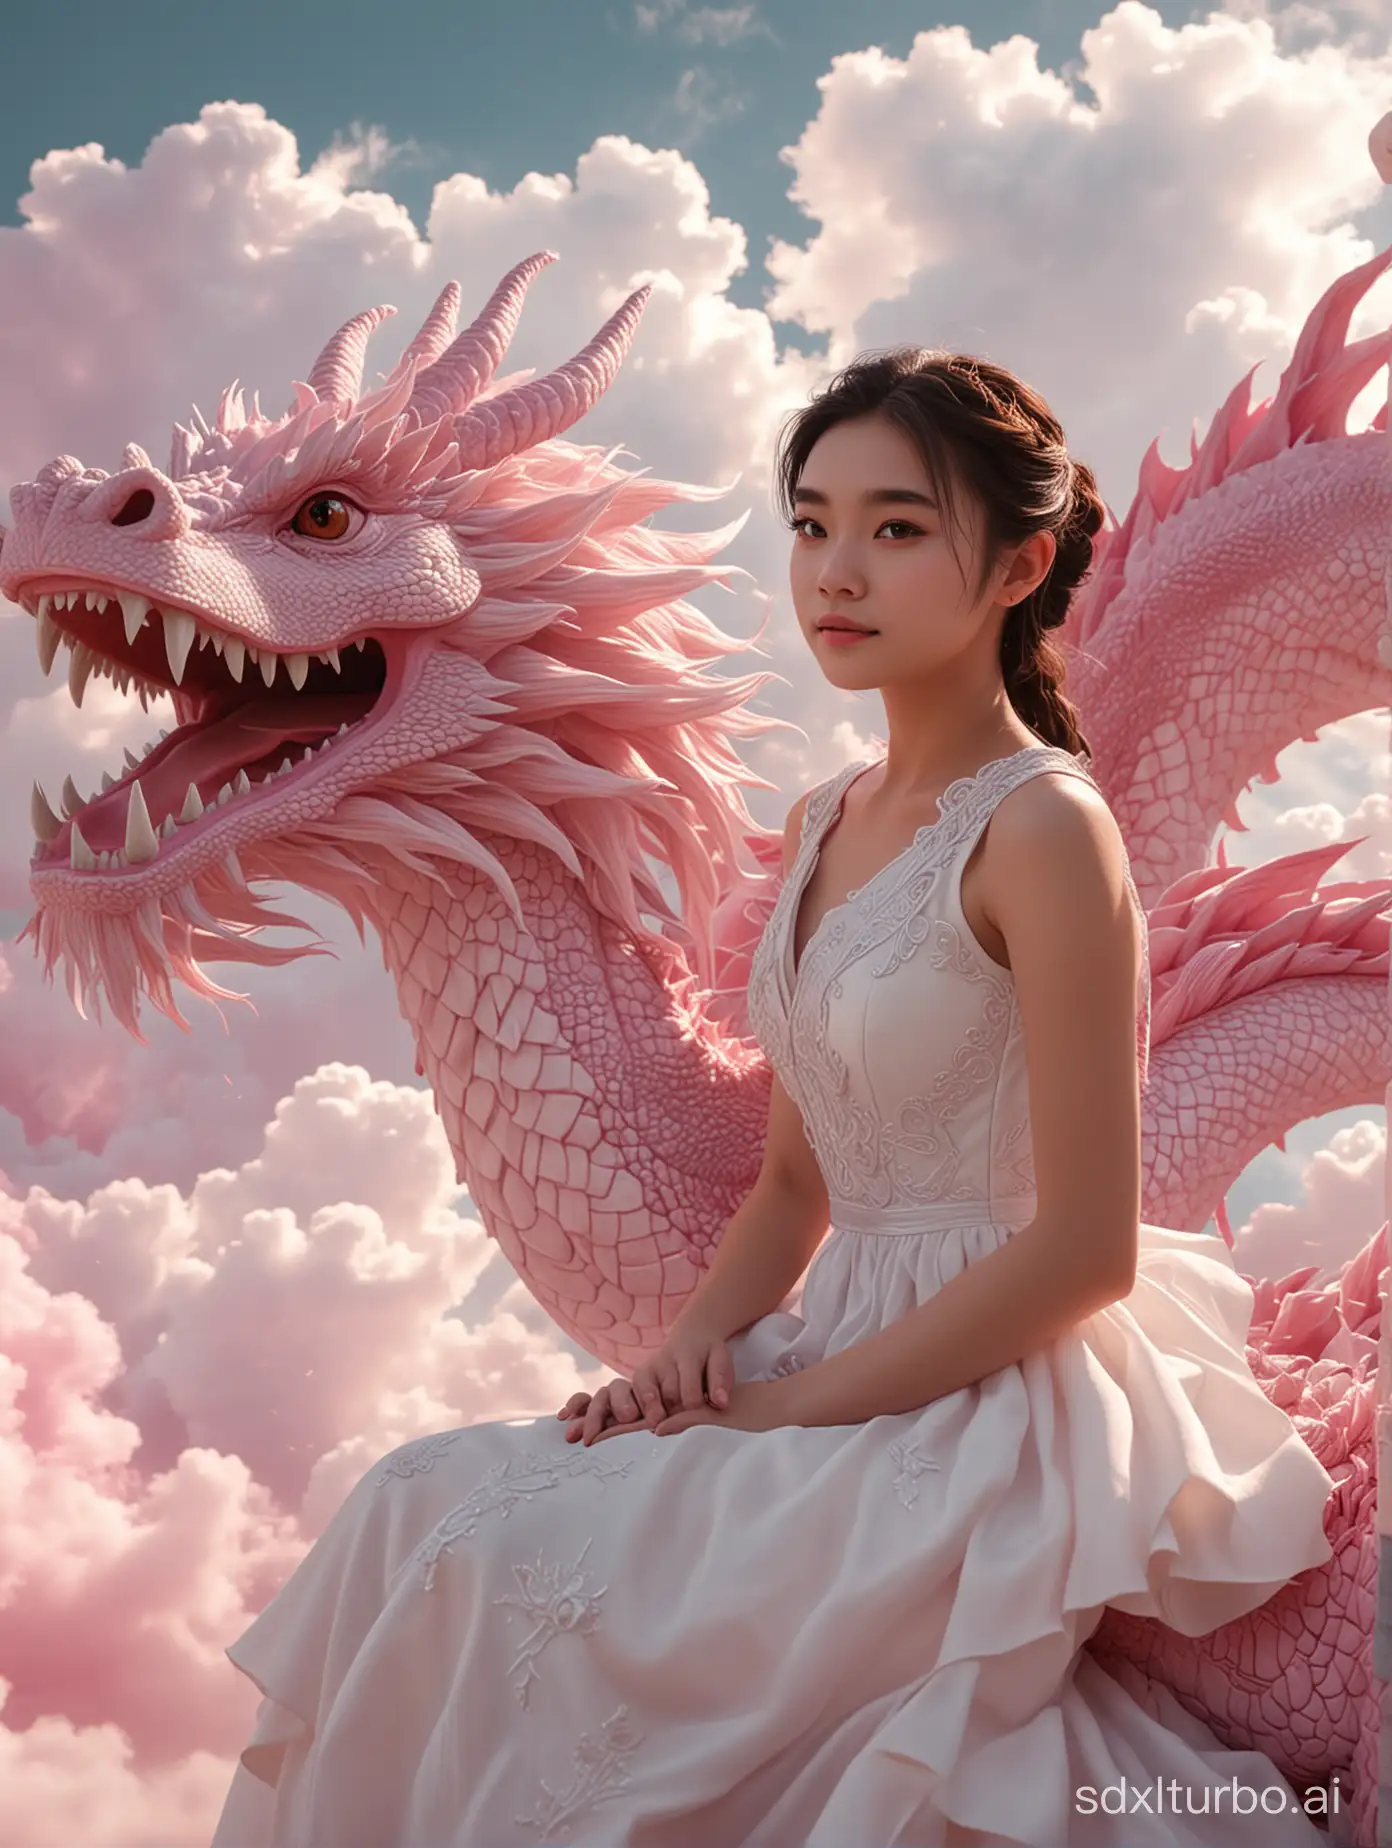 Young-Woman-in-White-Dress-Riding-Pink-Chinese-Dragon-through-Clouds